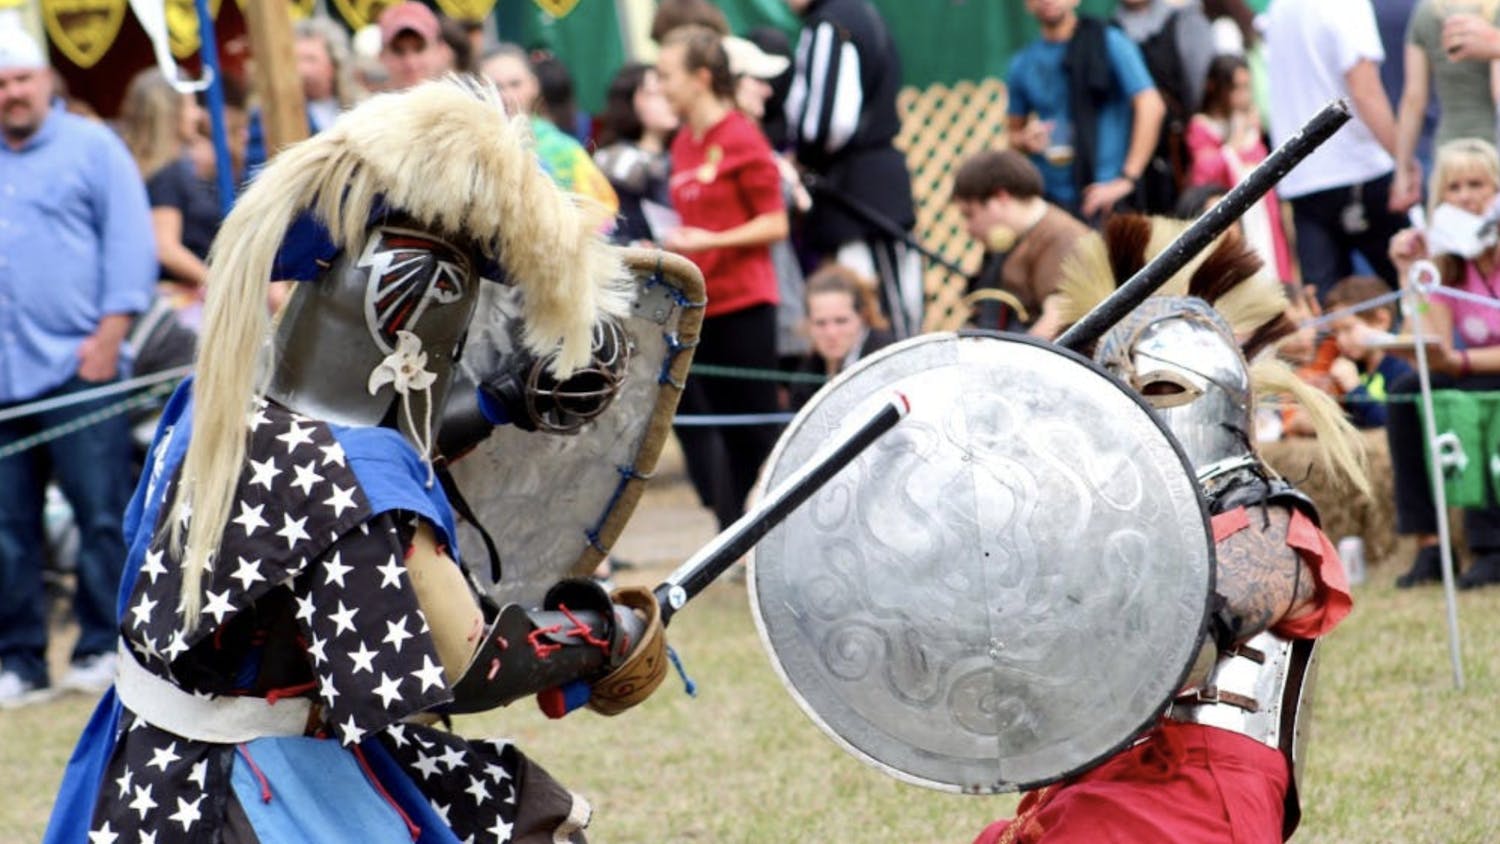 Knights joust at the 2018 Hoggetowne Medieval Faire.